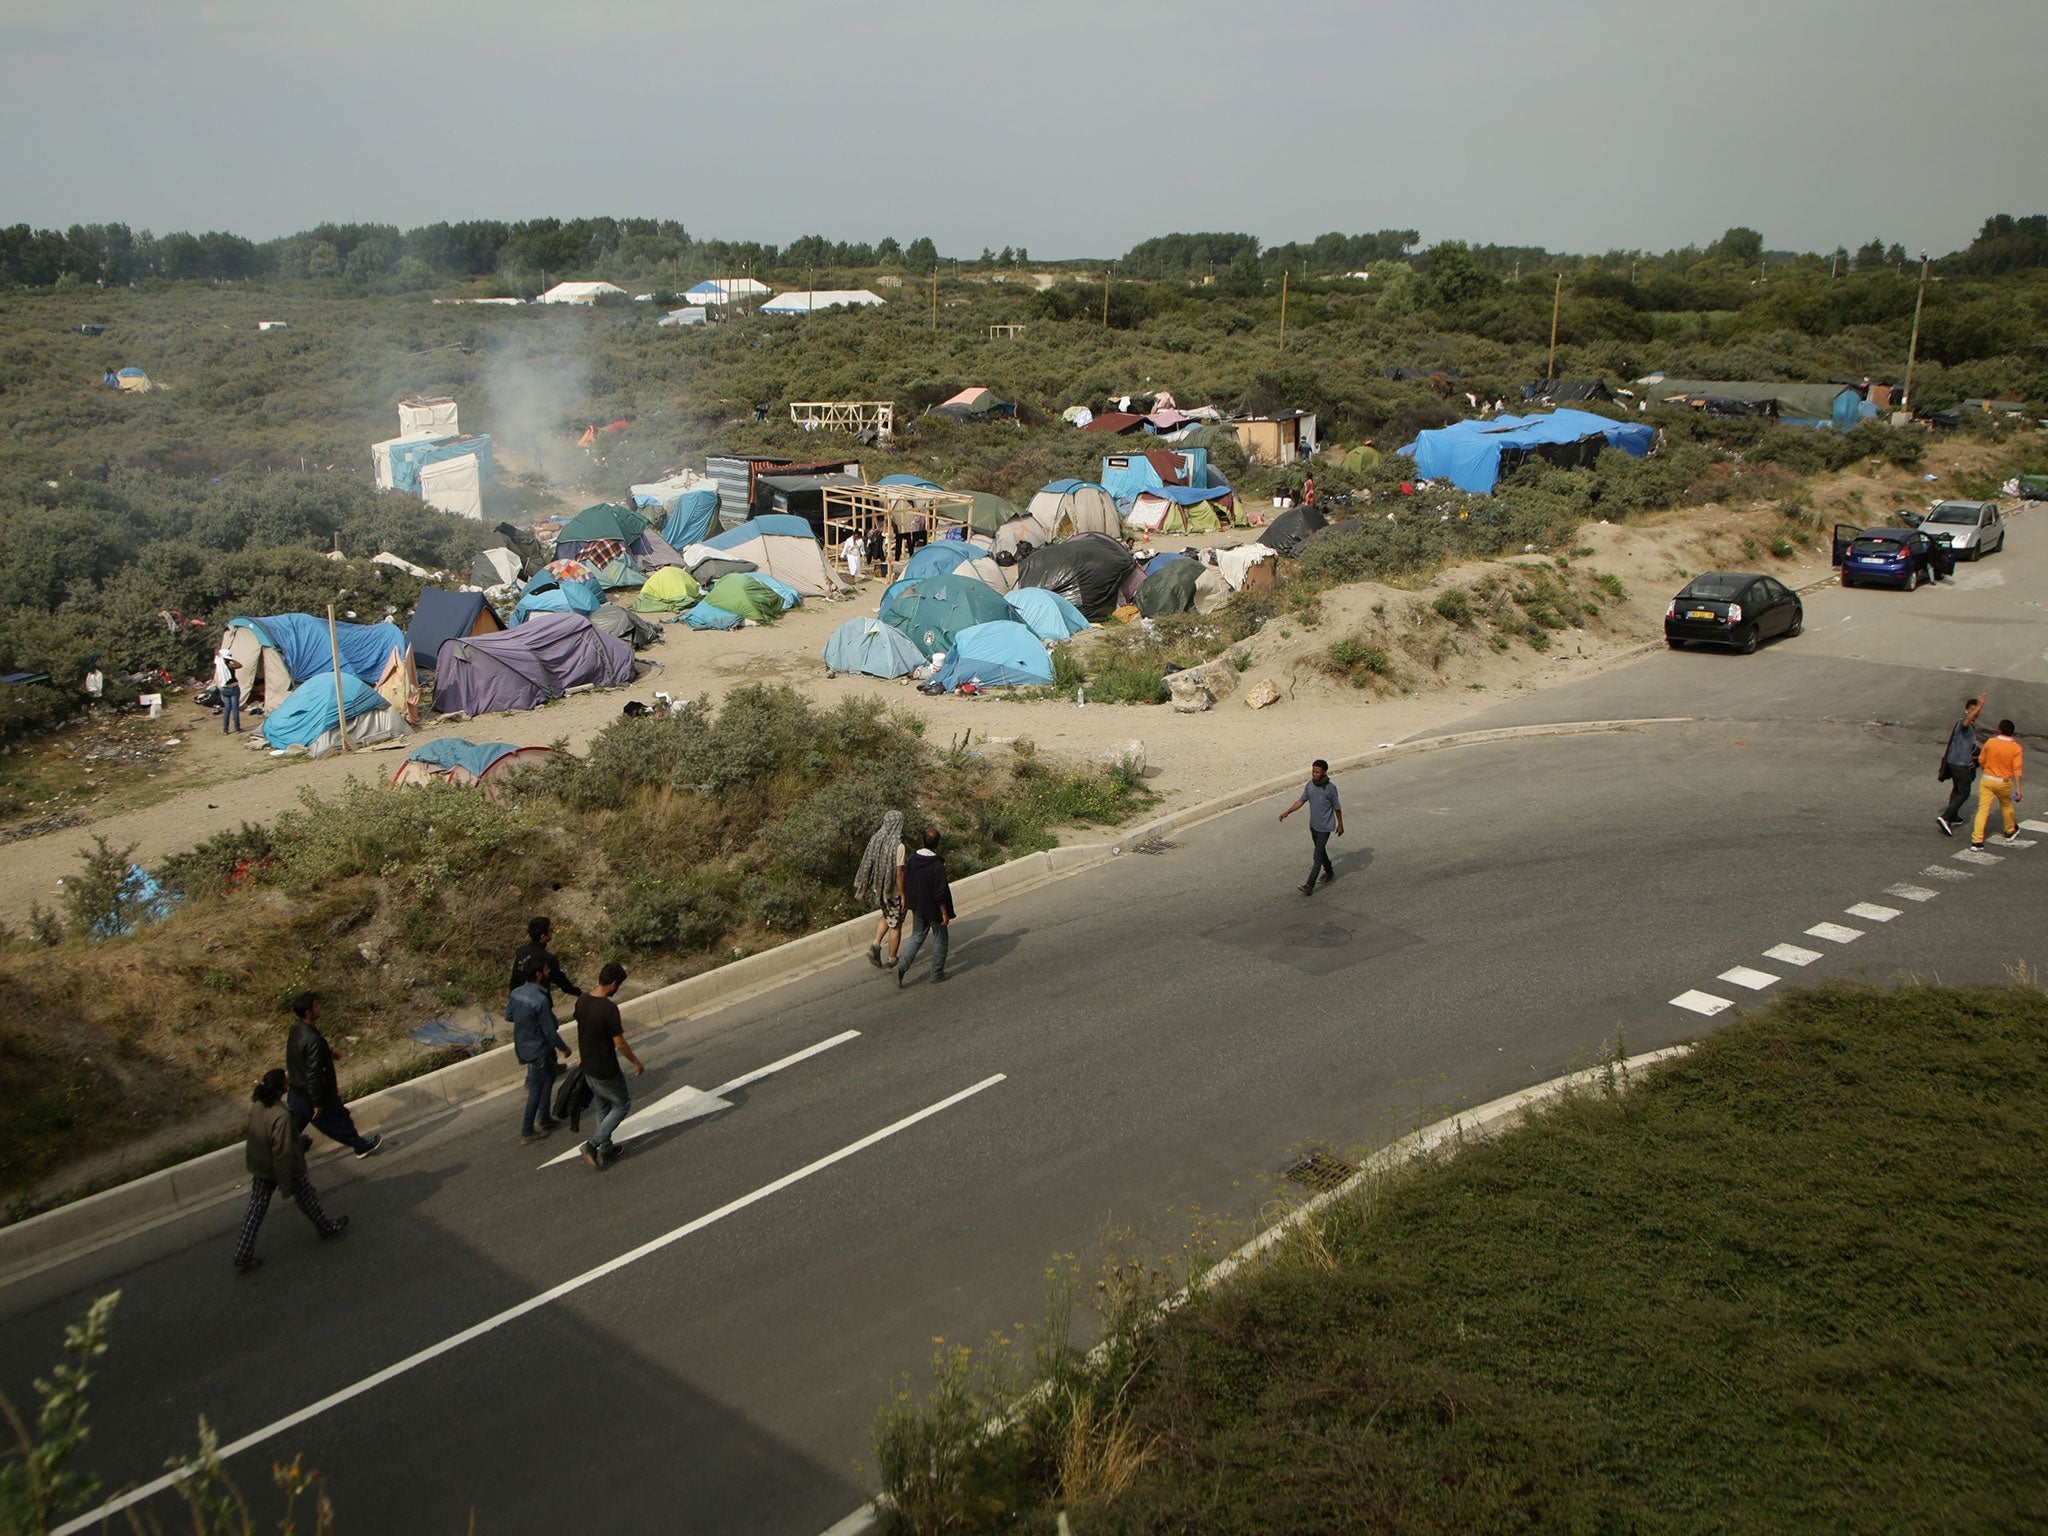 A view of the migrant camp known as the new Jungle in Calais, France.